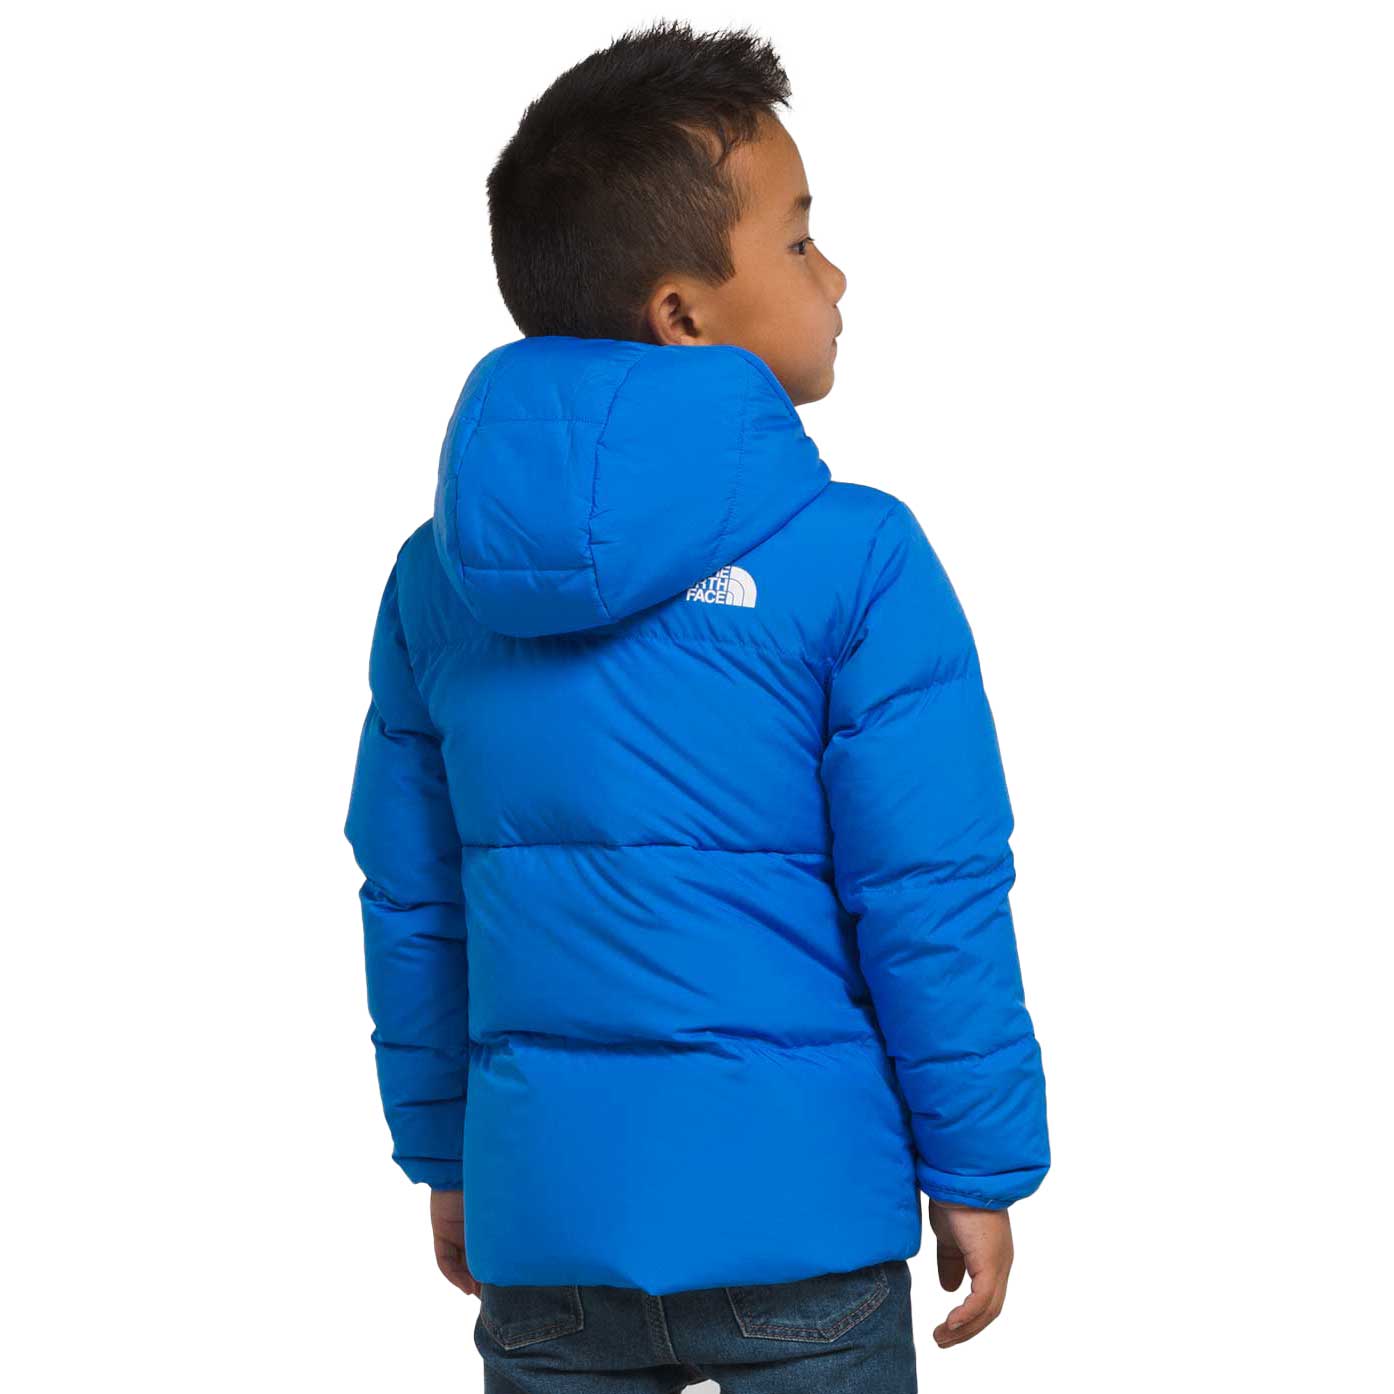 The North Face Baby KIDS- NORTH DOWN HOODED OPTIC BLUE - Paragon Sports:  NYC's Best Specialty Sports Store